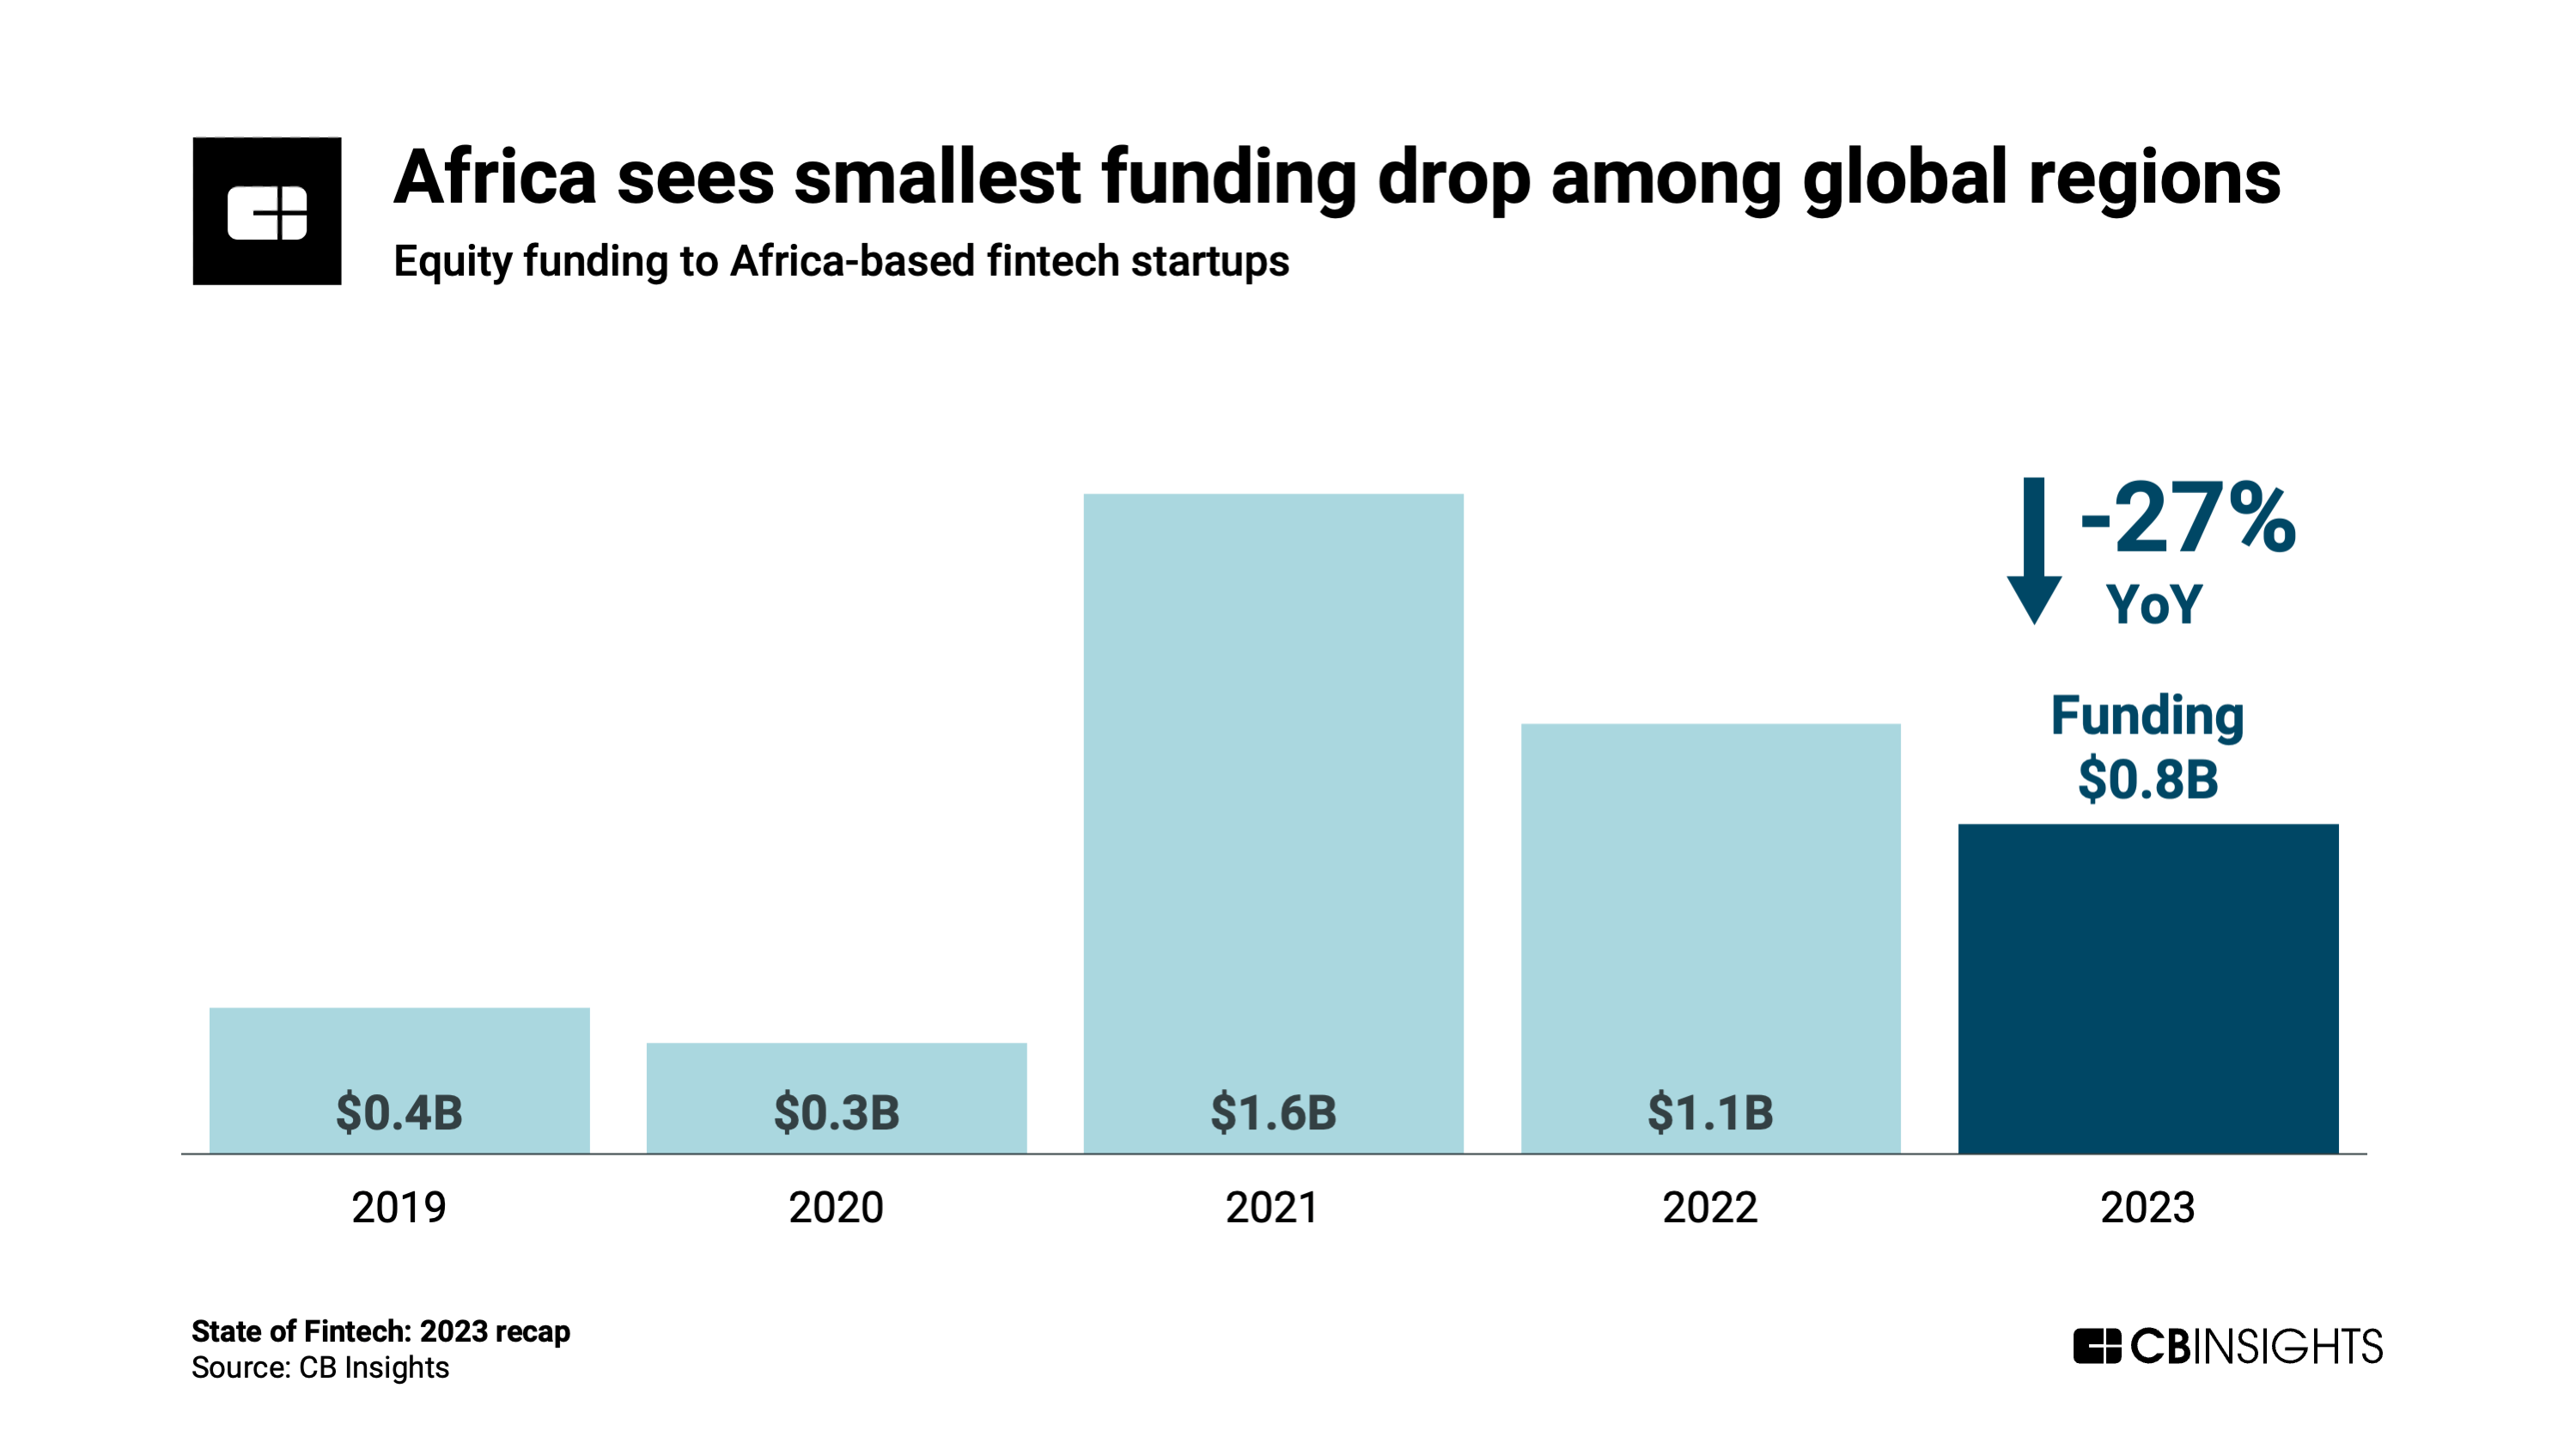 Africa sees smallest funding drop among global regions